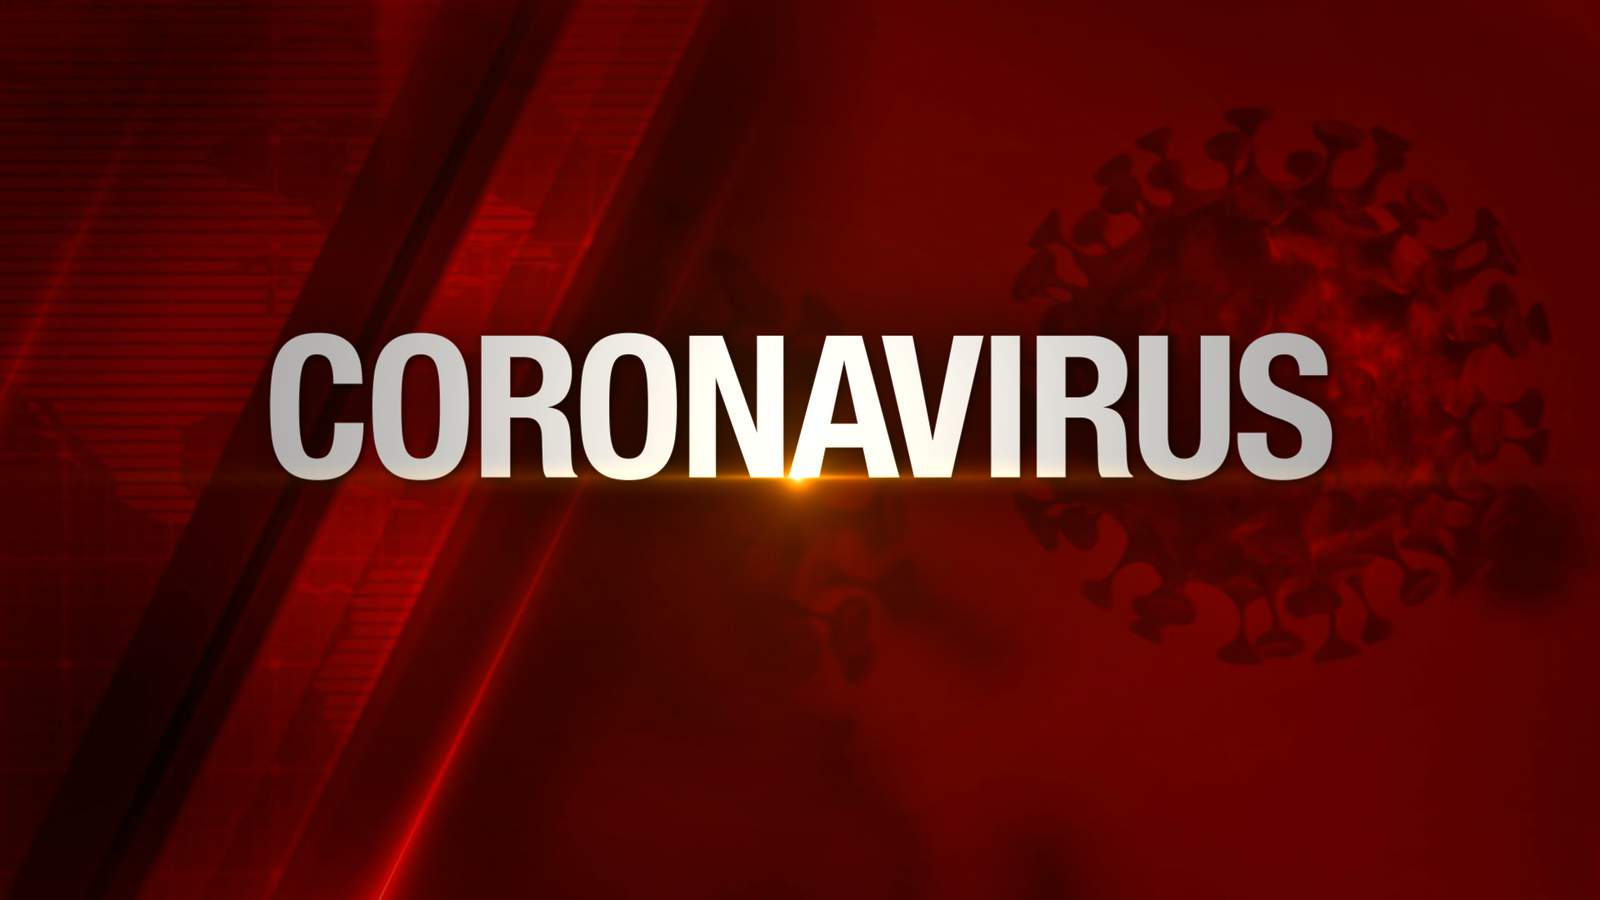 Franklin County has its first confirmed coronavirus case